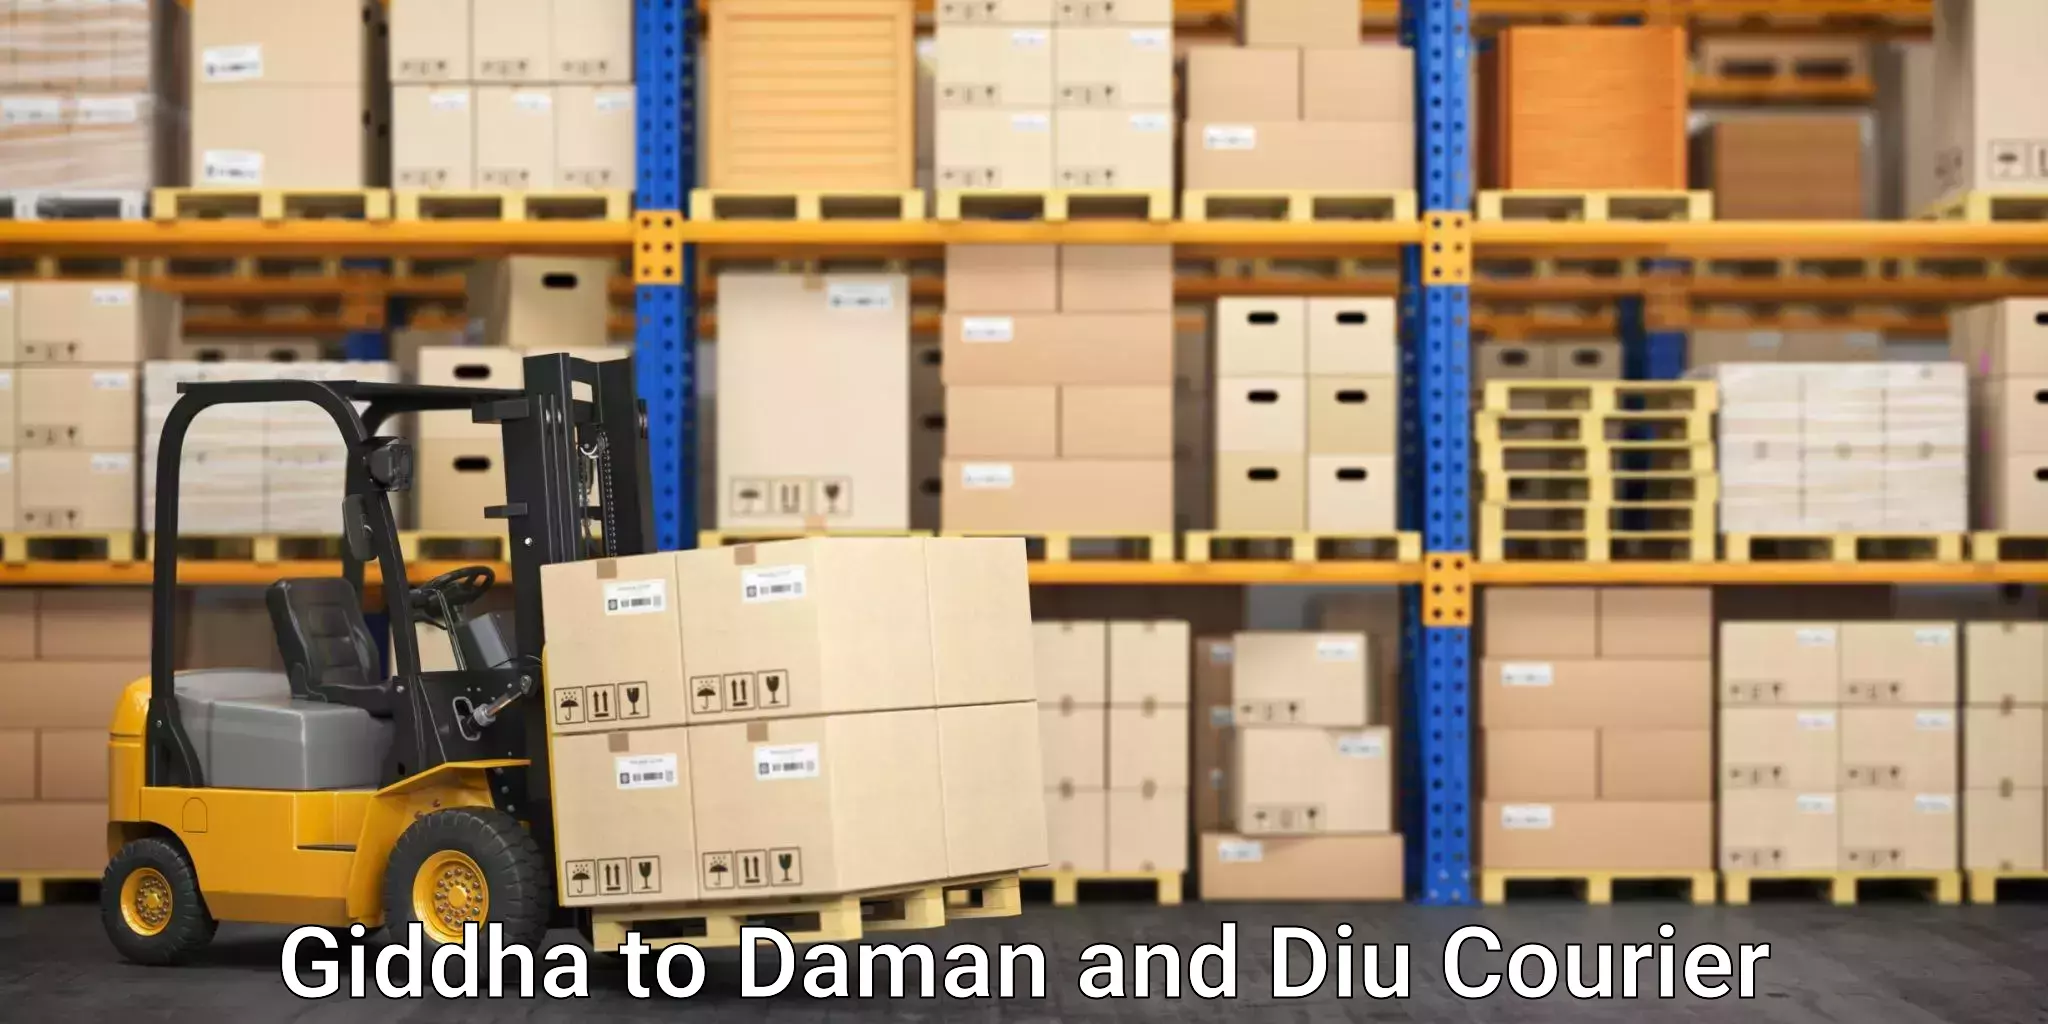 Comprehensive relocation services Giddha to Daman and Diu